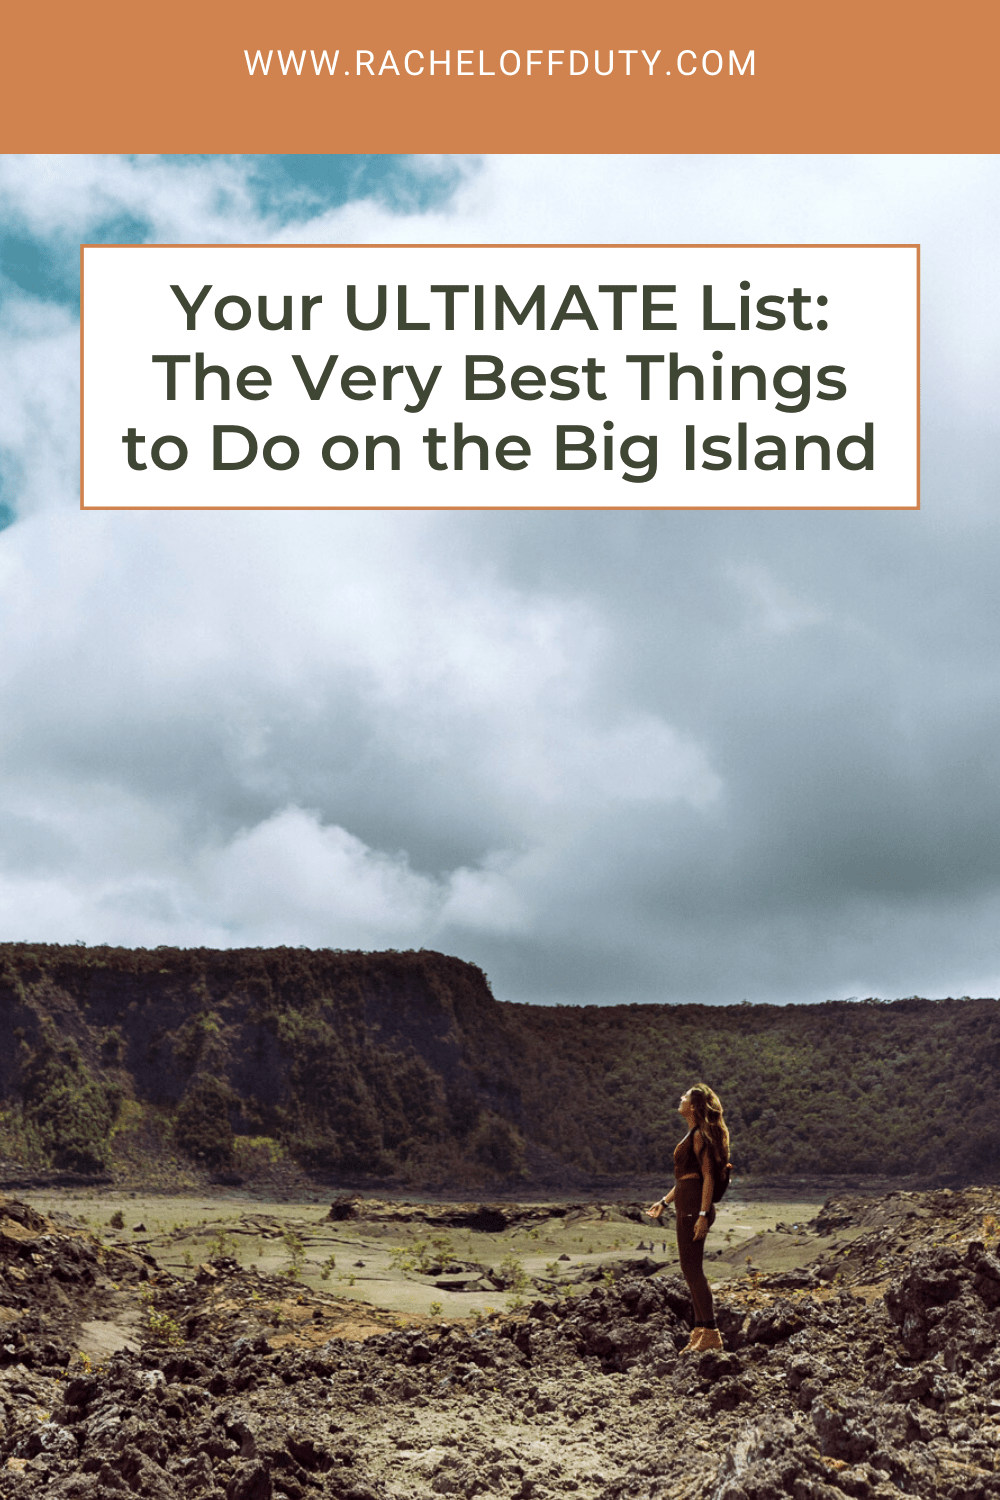 The Best Things to Do on the Big Island - Rachel Off Duty